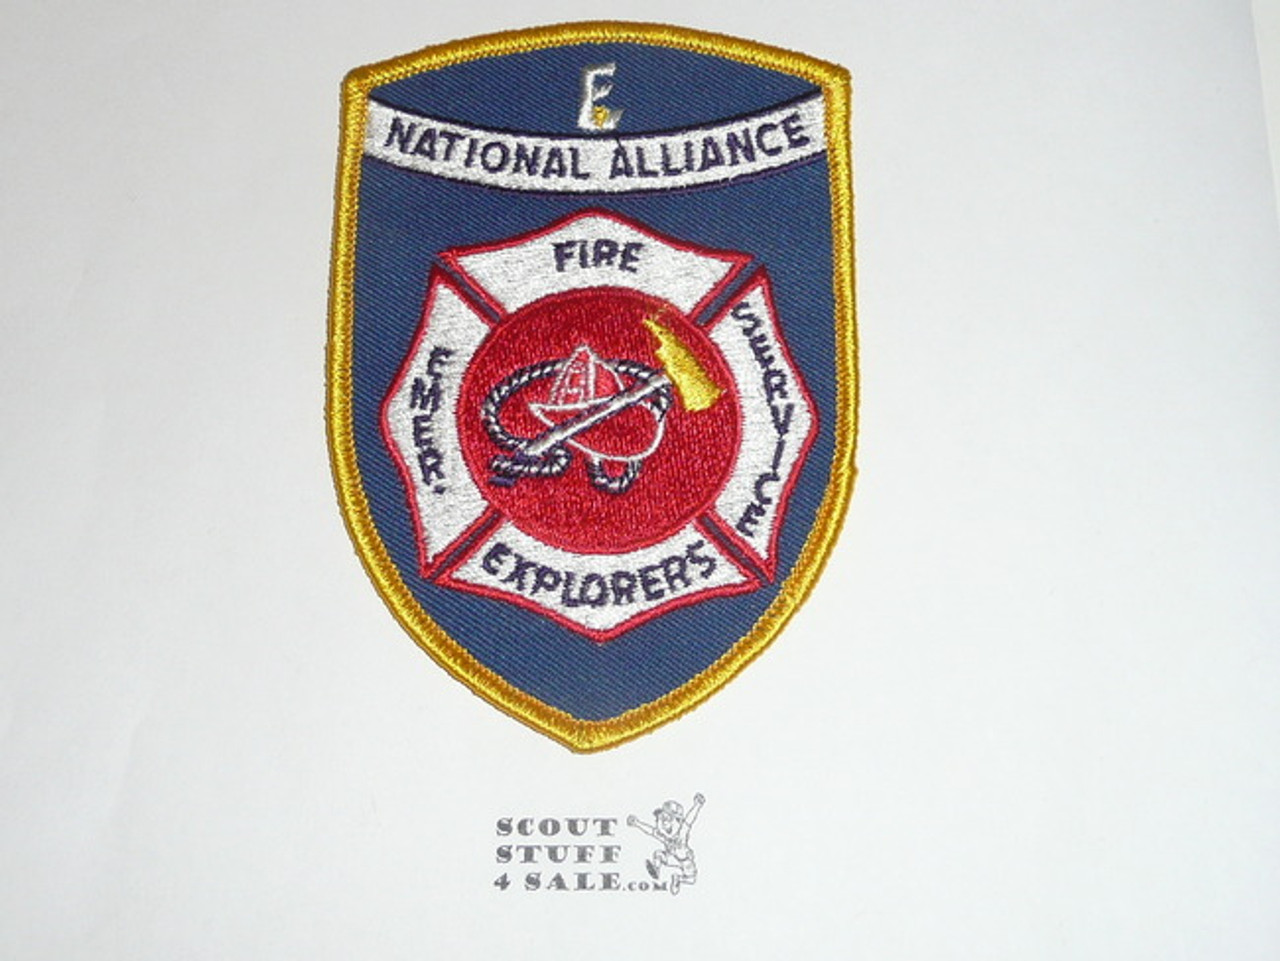 National Alliance of Emergency and Fire Explorer Scouts Patch